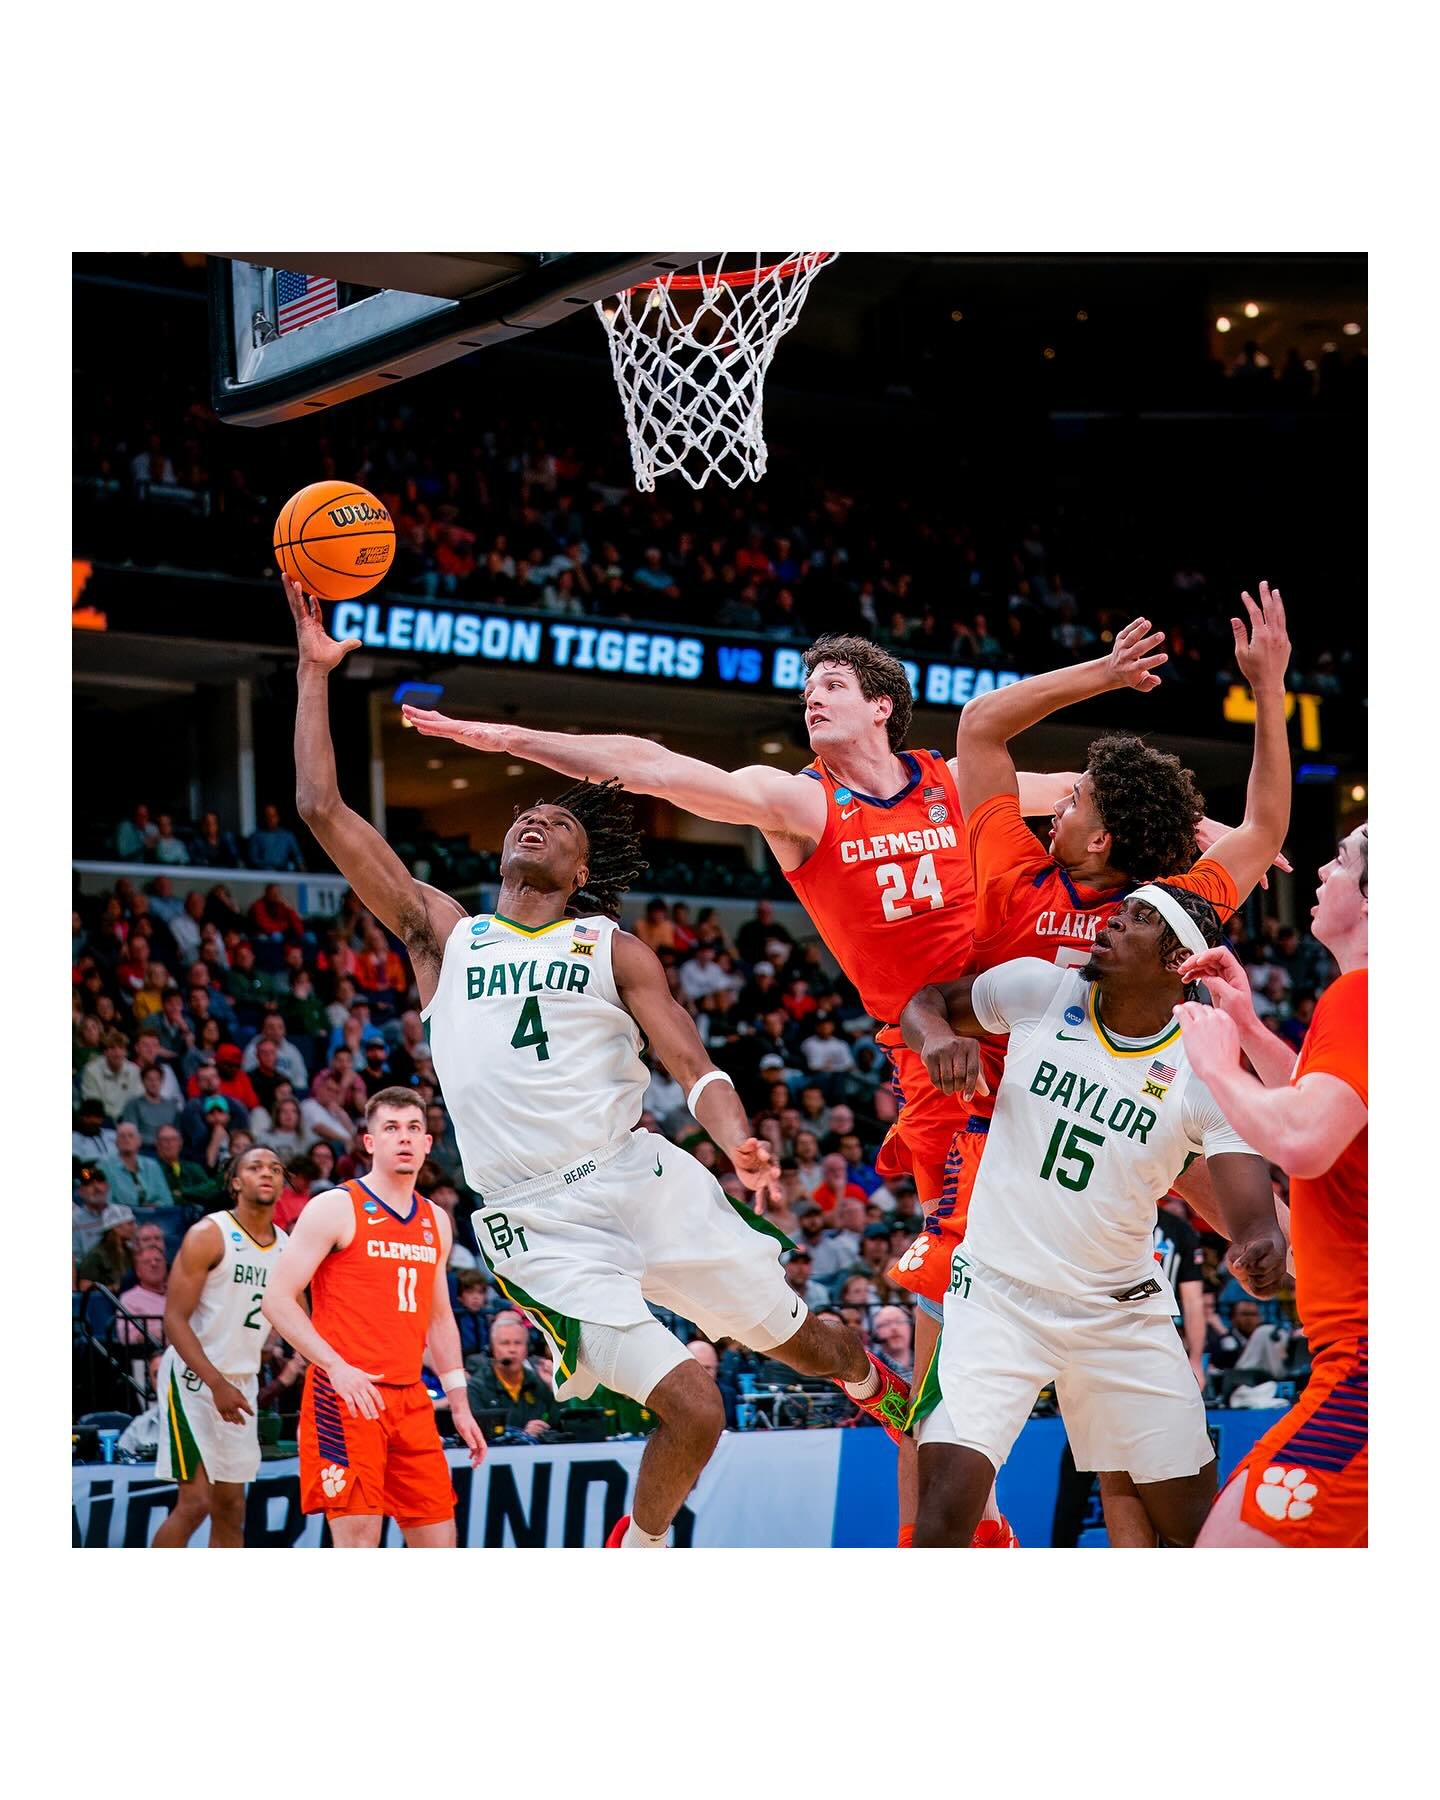 📸 // BU vs Clemson 🏀 [R32] 
Finally posting from that long night. Hell of a fight. 
#sicem #baylor #marchmadness #basketballphotography 
Shot for @sicem365